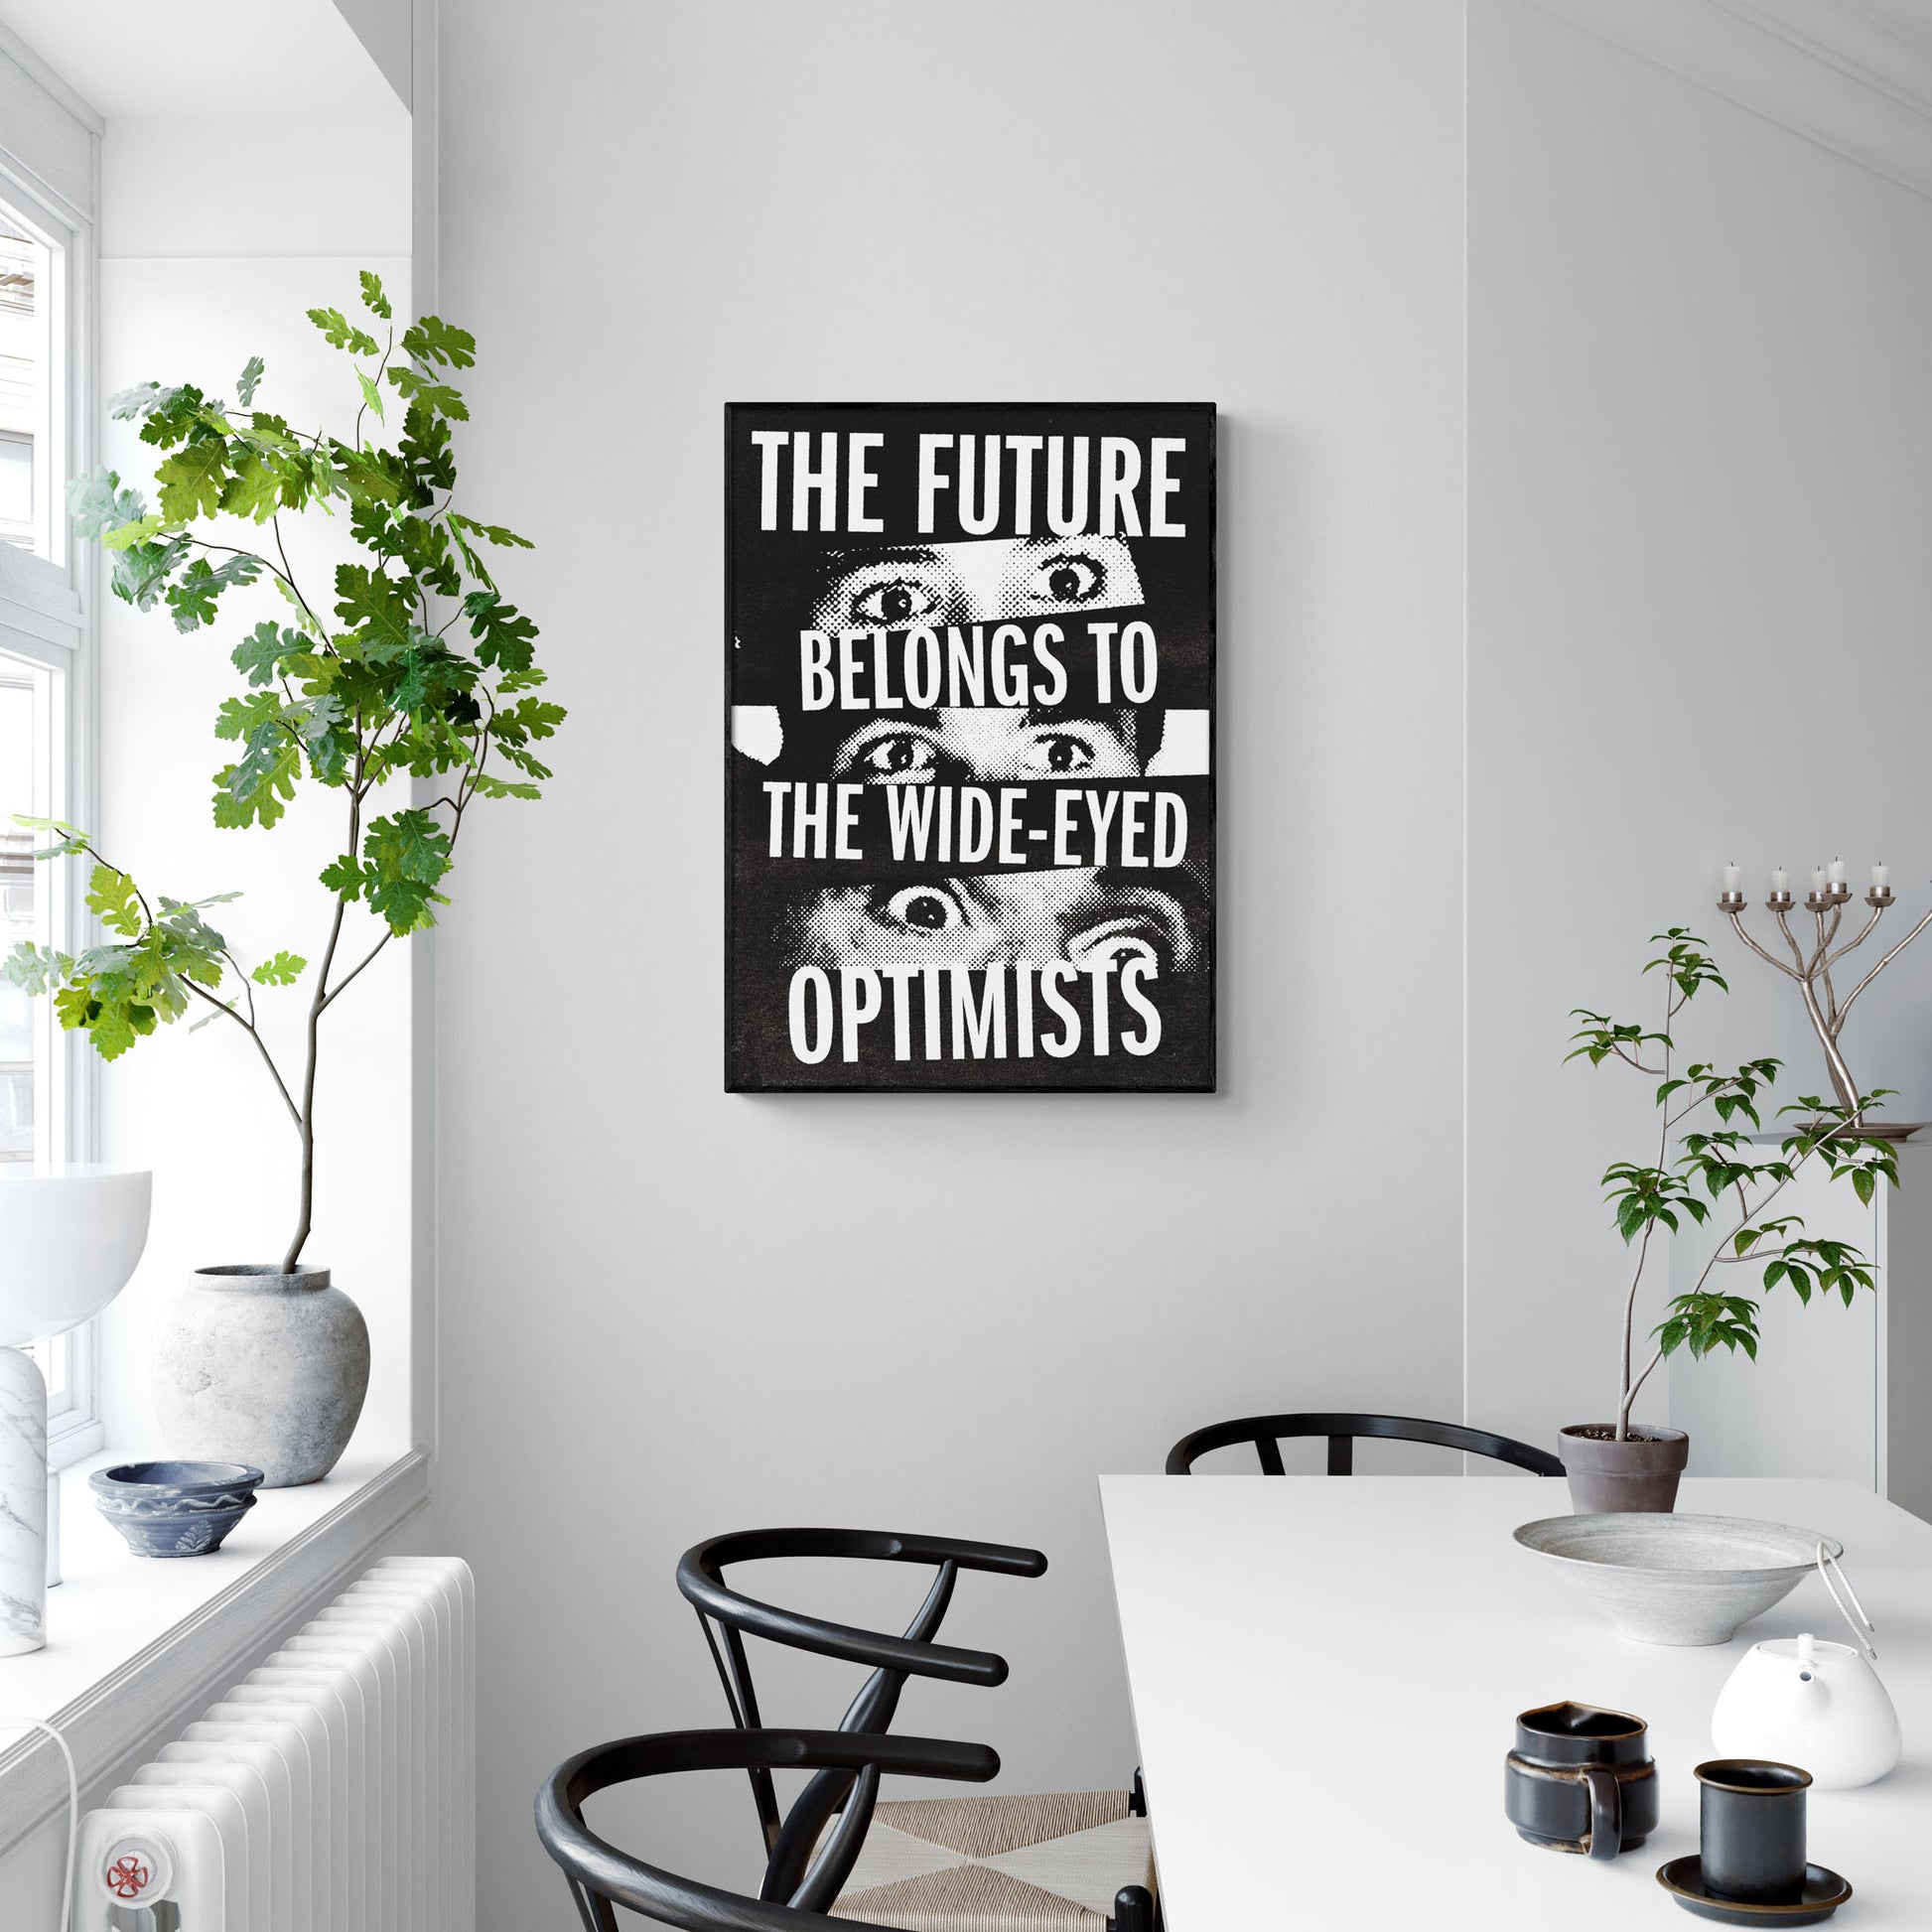 The Future Belongs To The Wide-Eyed Optimists - Poster